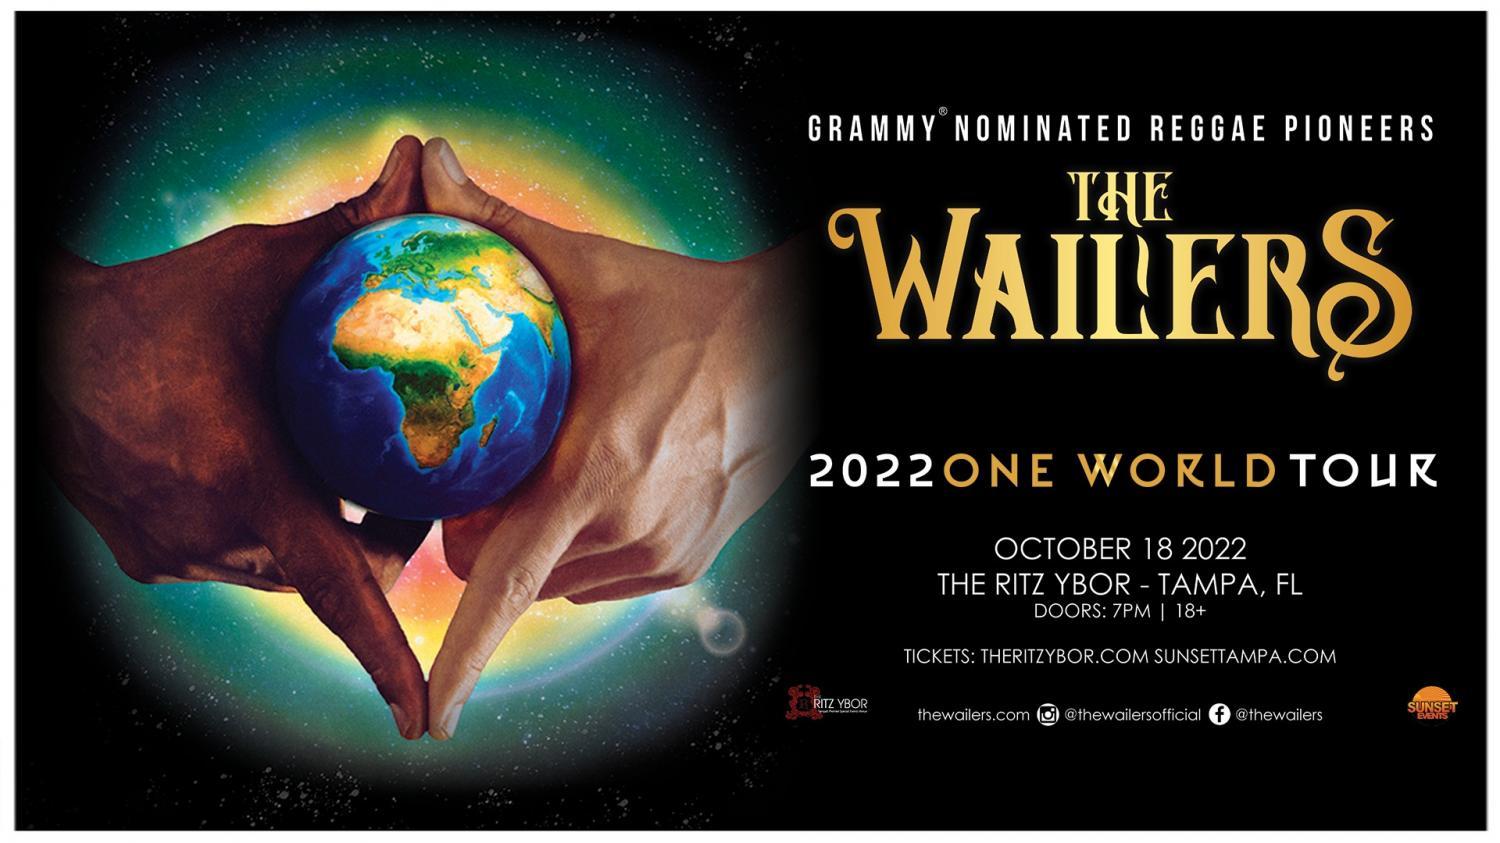 The Wailers • 2022 One World Tour - Tampa - The RITZ Ybor
Tue Oct 18, 4:00 PM - Tue Oct 18, 9:00 PM